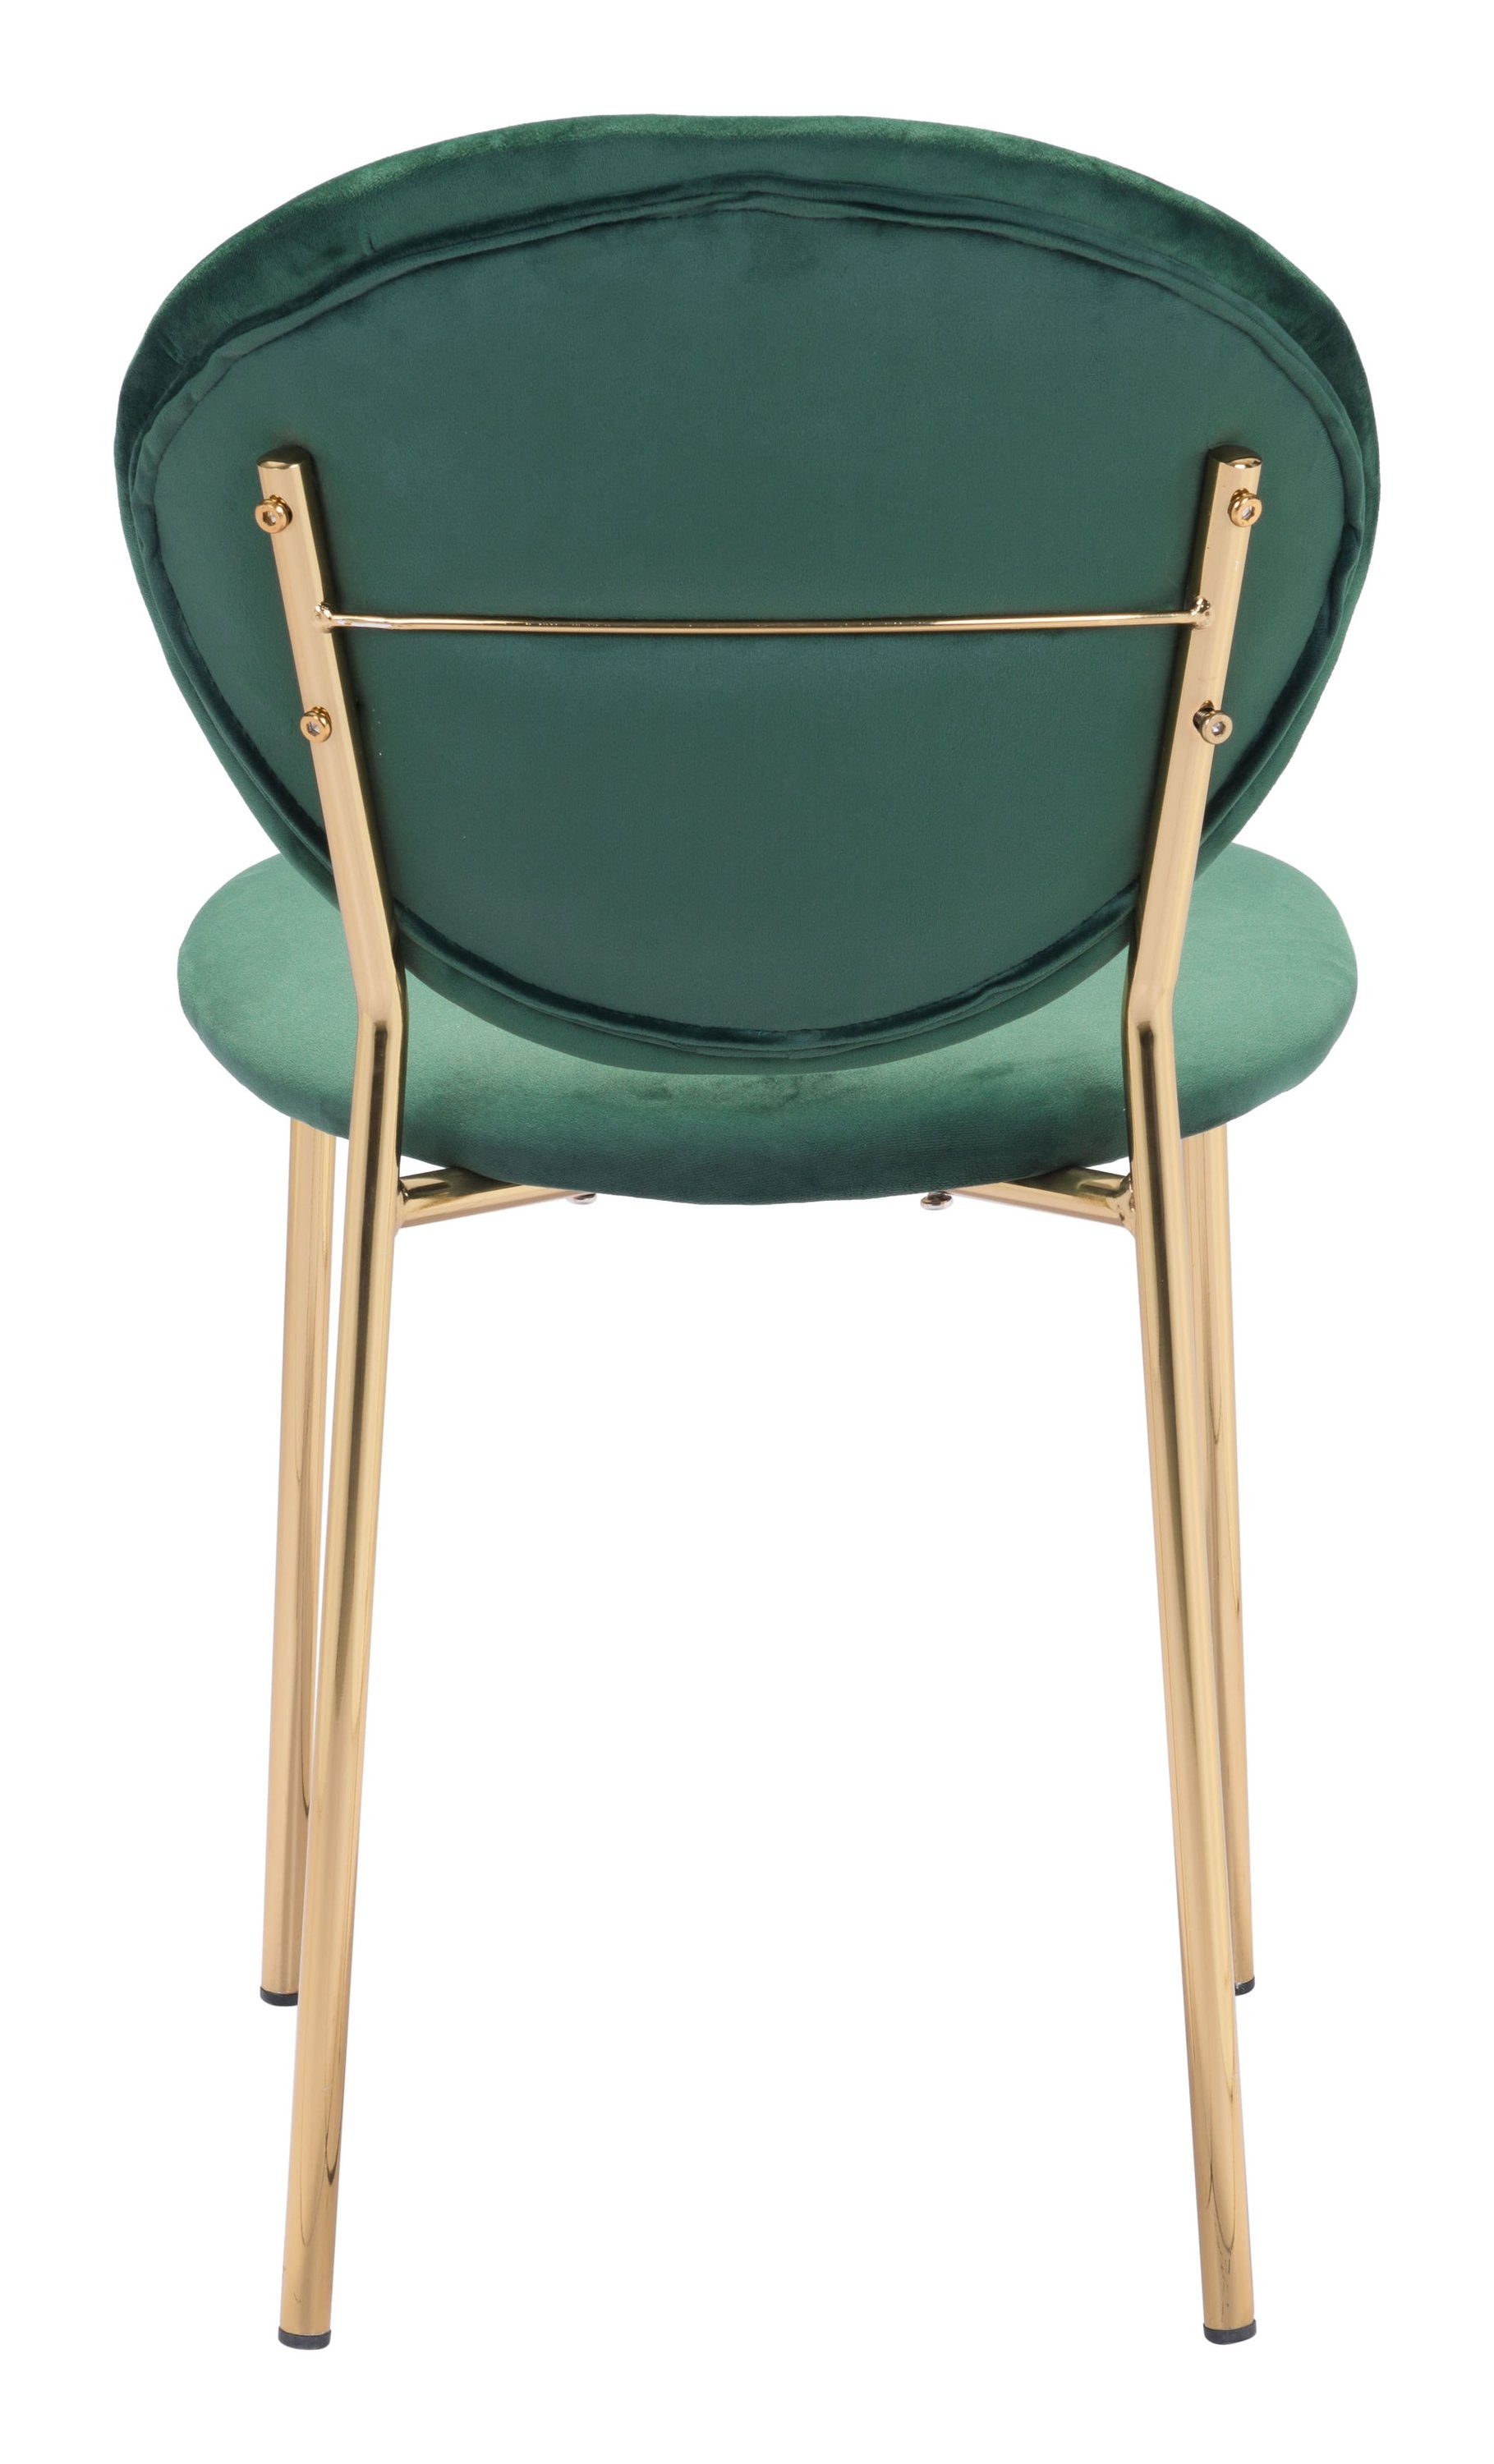 18.1" x 23.6" x 32.3" Green and Gold Velvet Steel and Plywood Chair